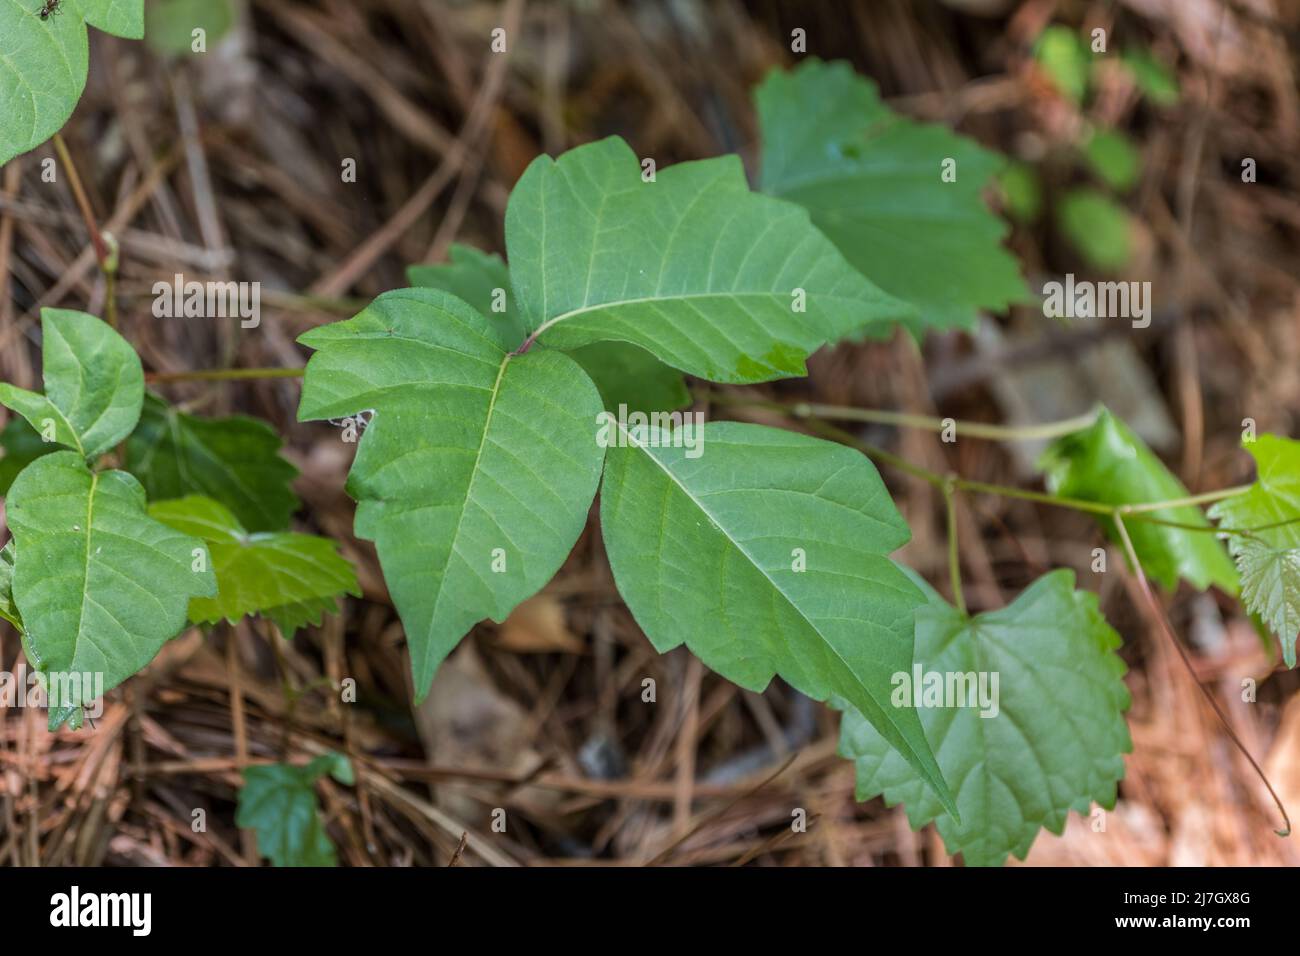 Poison Ivy Plant High Resolution Stock Photography and Images - Alamy